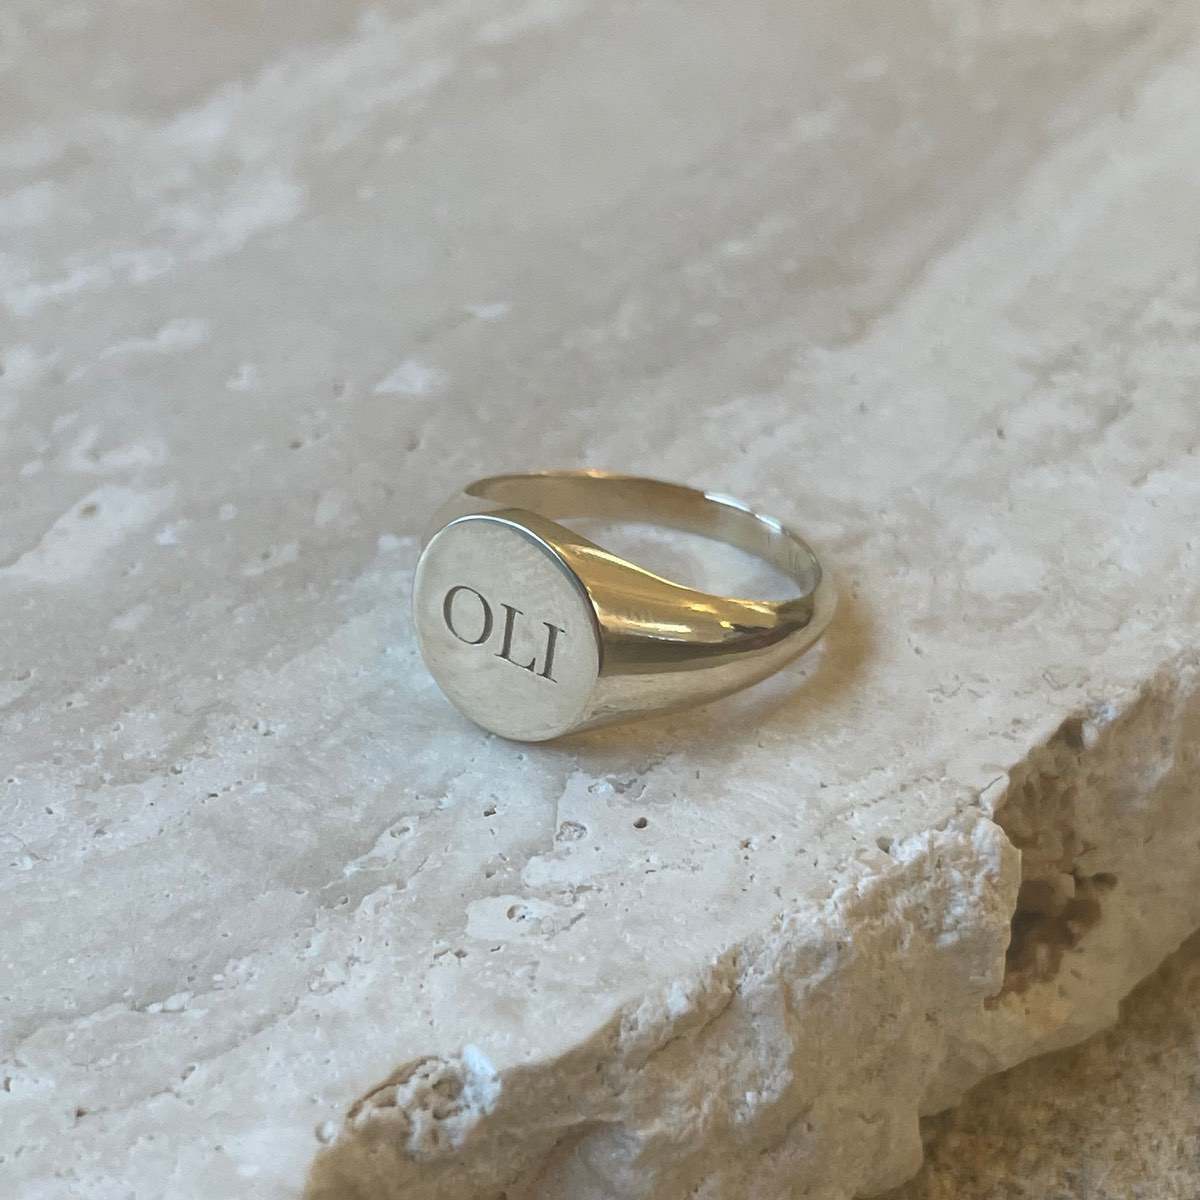 Round signet ring with OLI engraved on the face. Add a date, initials, images or words in a bespoke style to our customisable products. Choose from single letter (for tiny beads and charms) or multiple letters for dates and words.